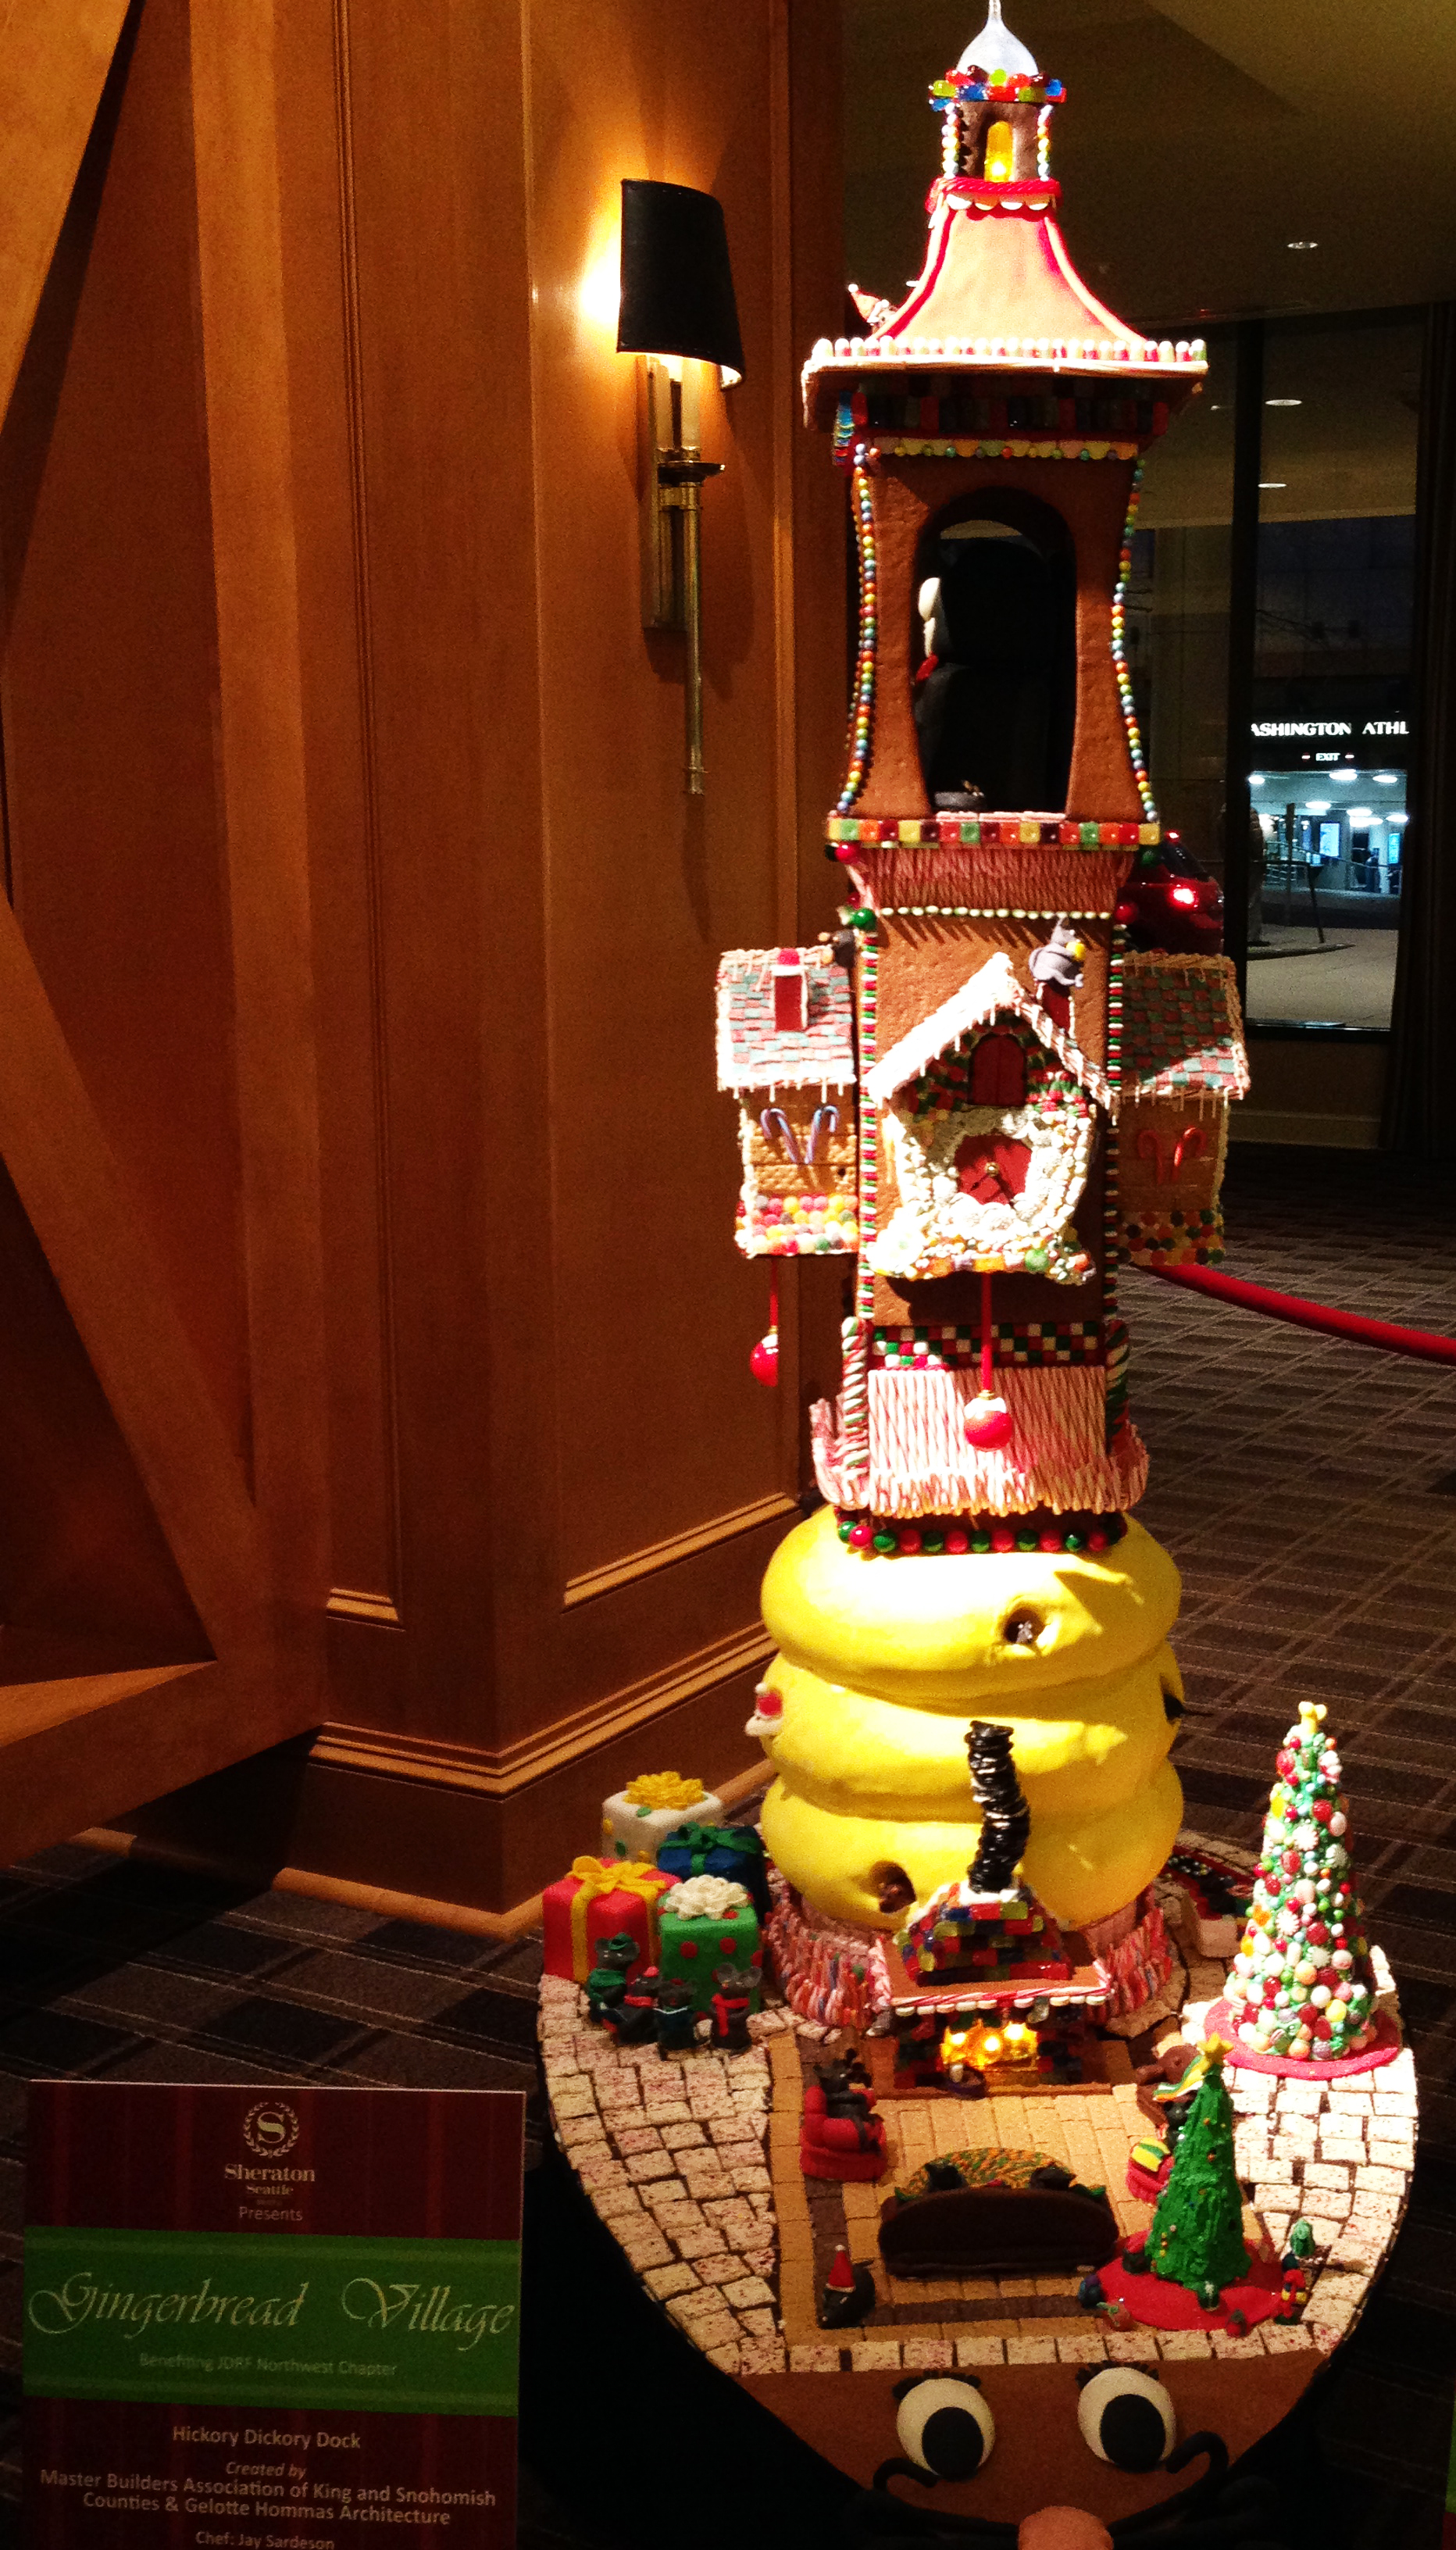 Seattle Gingerbread House Mouse Ran Up the Clock by Master Builders Association and Gelotte Hommas Architecture